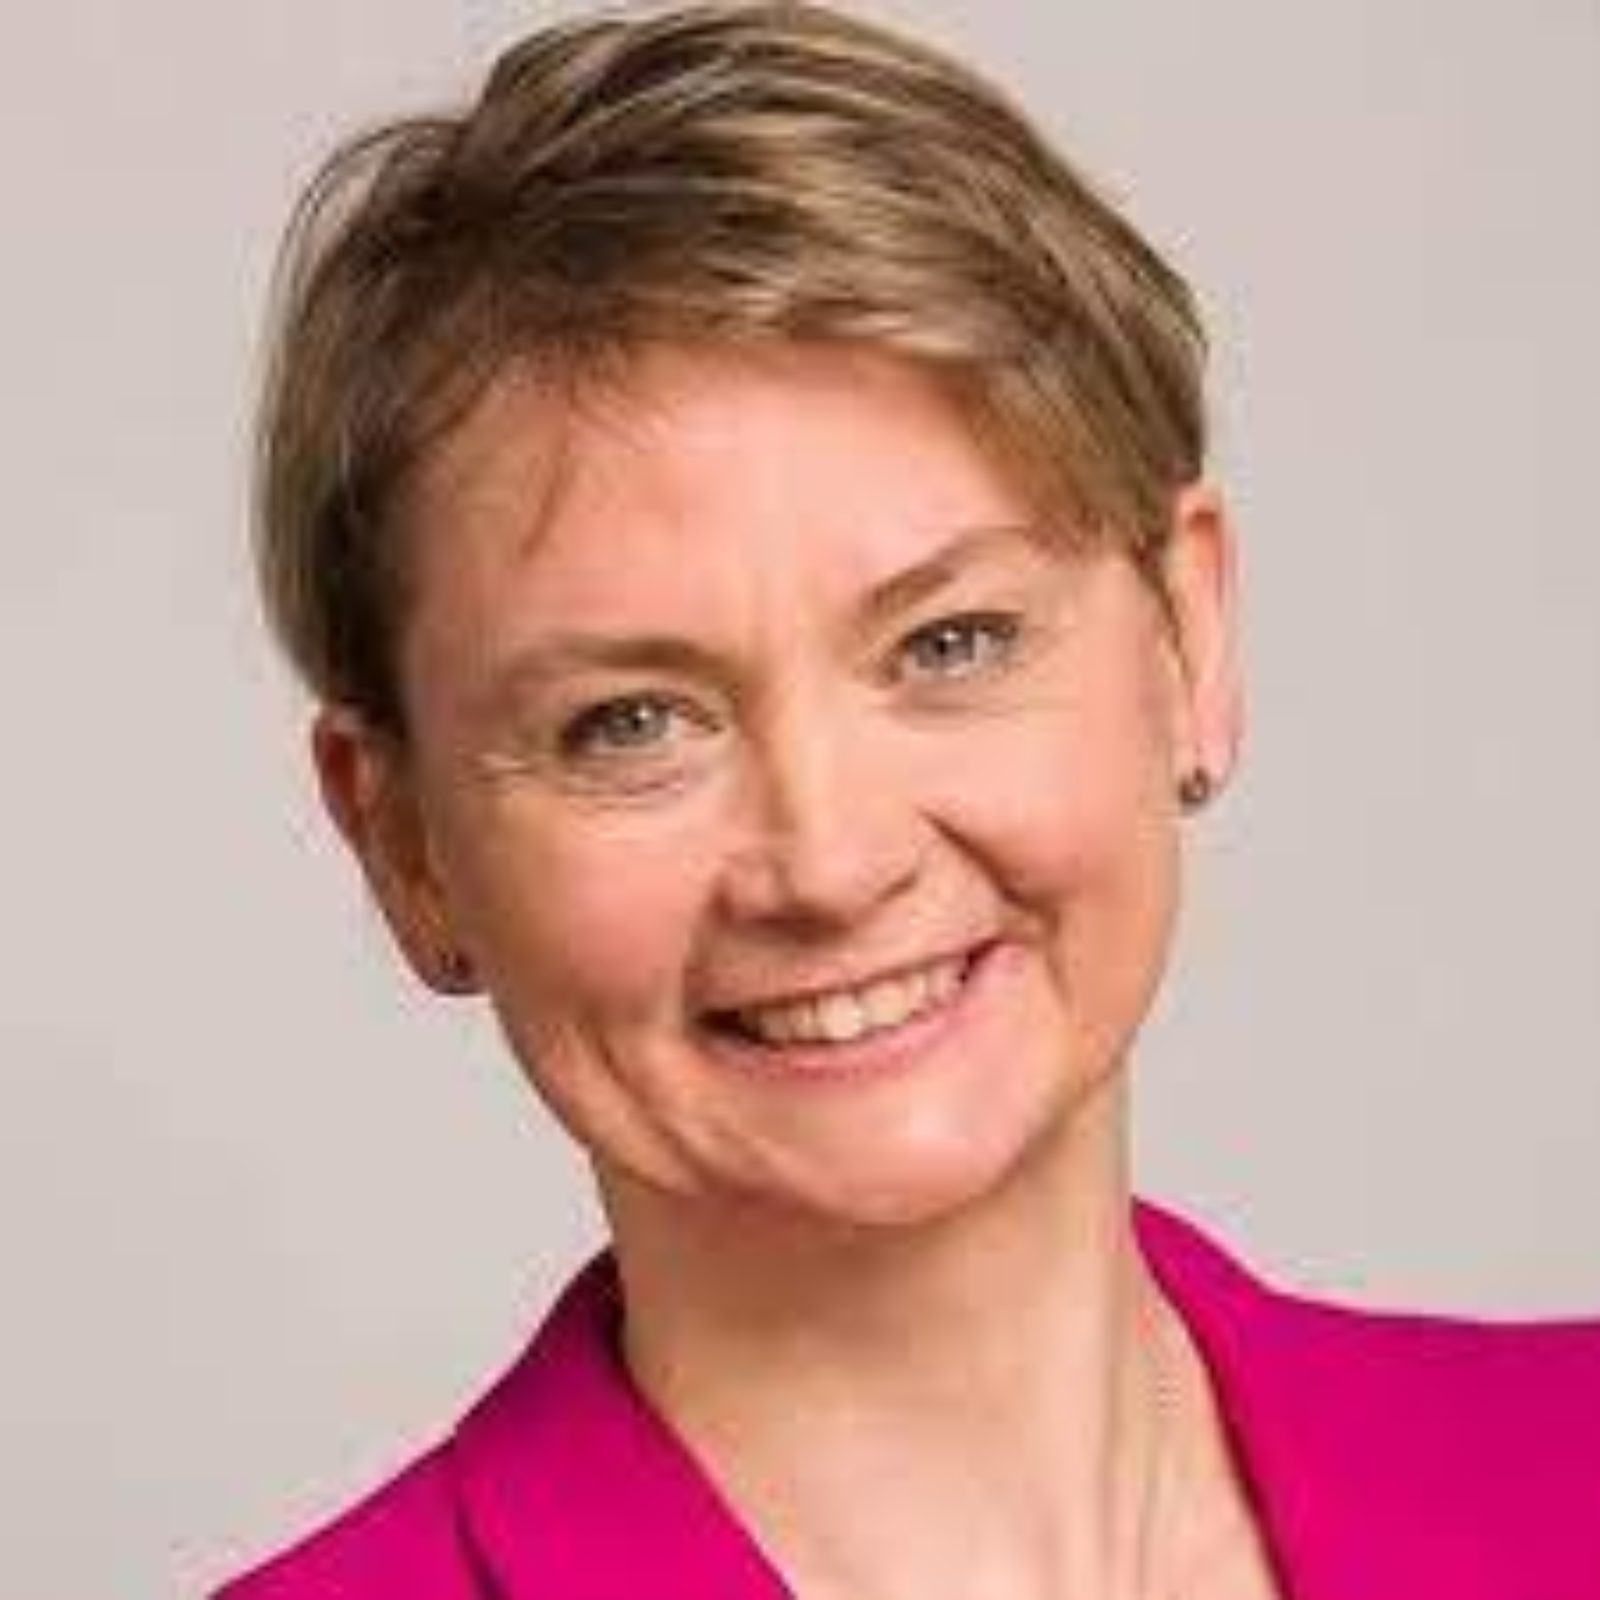 A picture of Yvette Cooper 